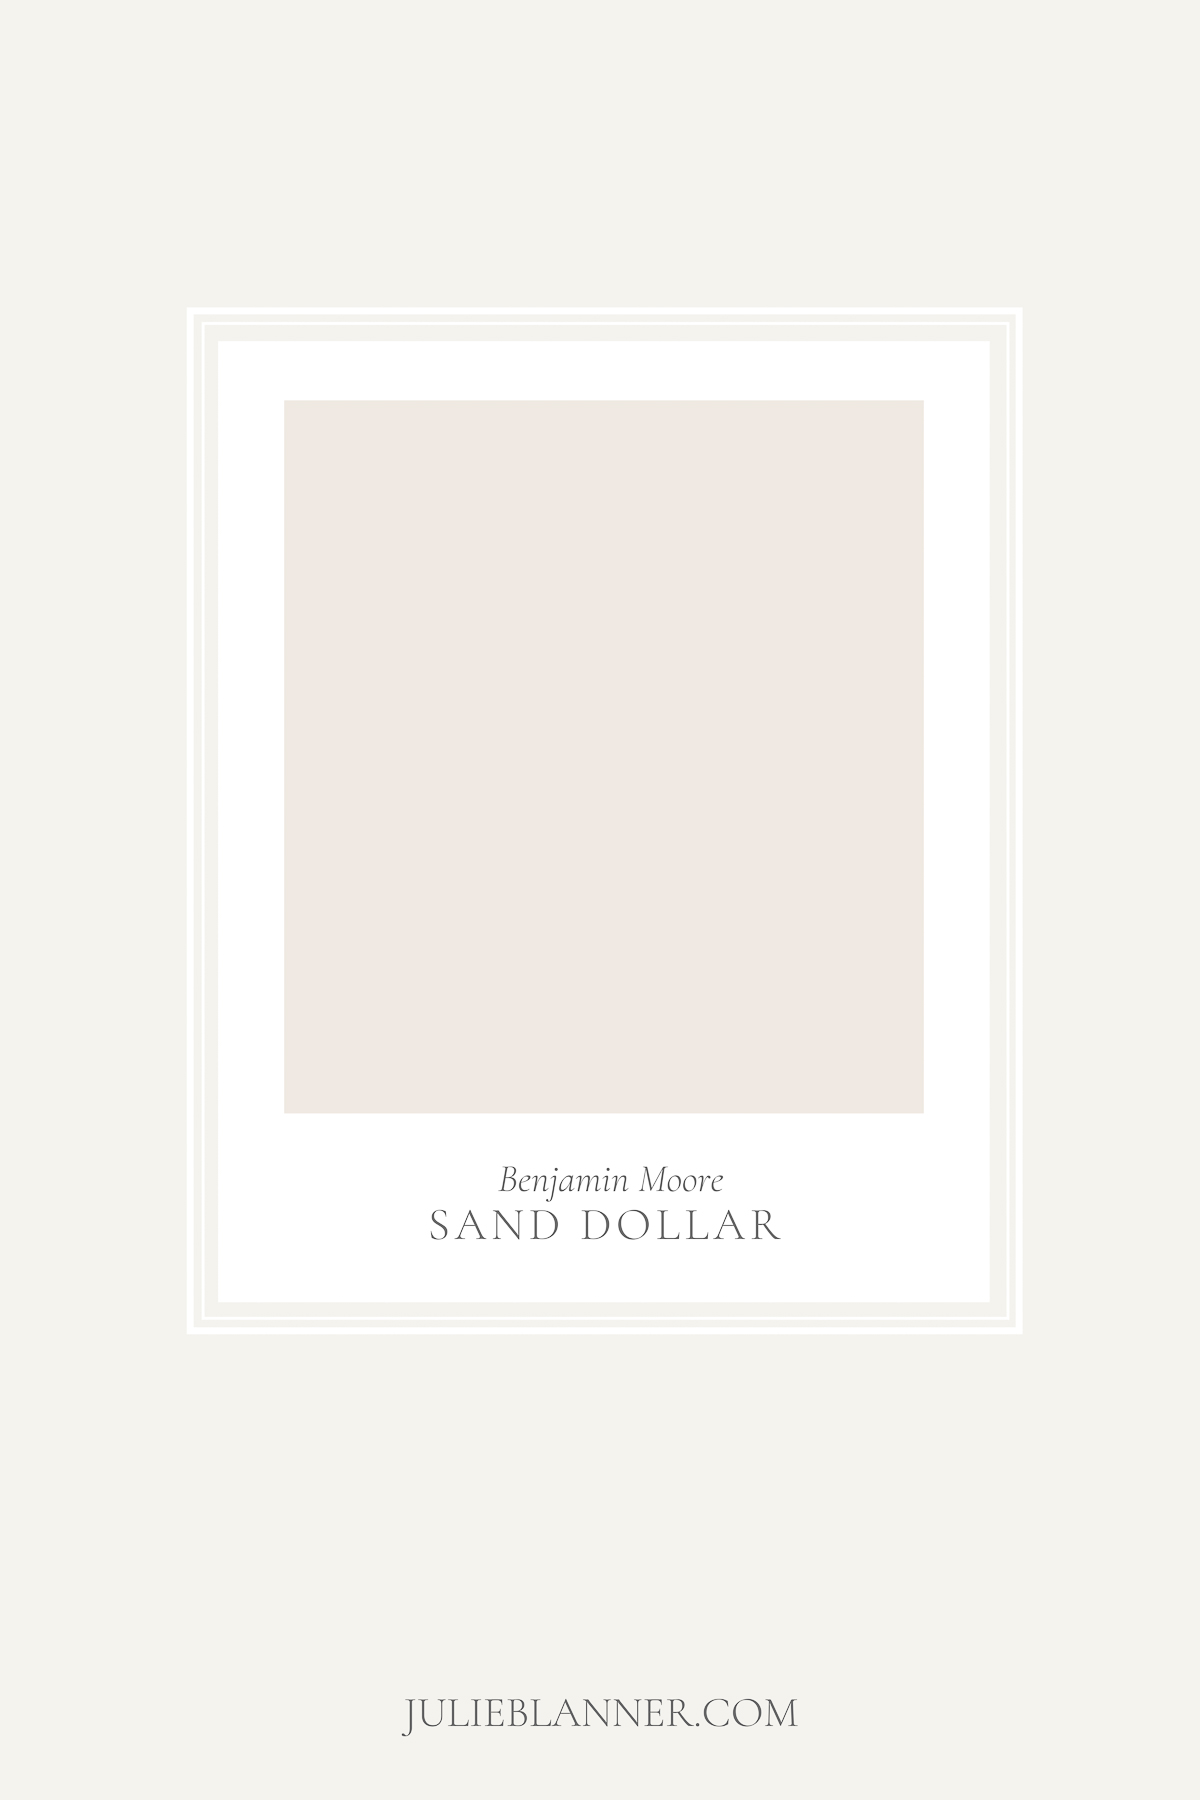 A paint sample card of Benjamin Moore Sand Dollar, as part of a blush pink paint guide.